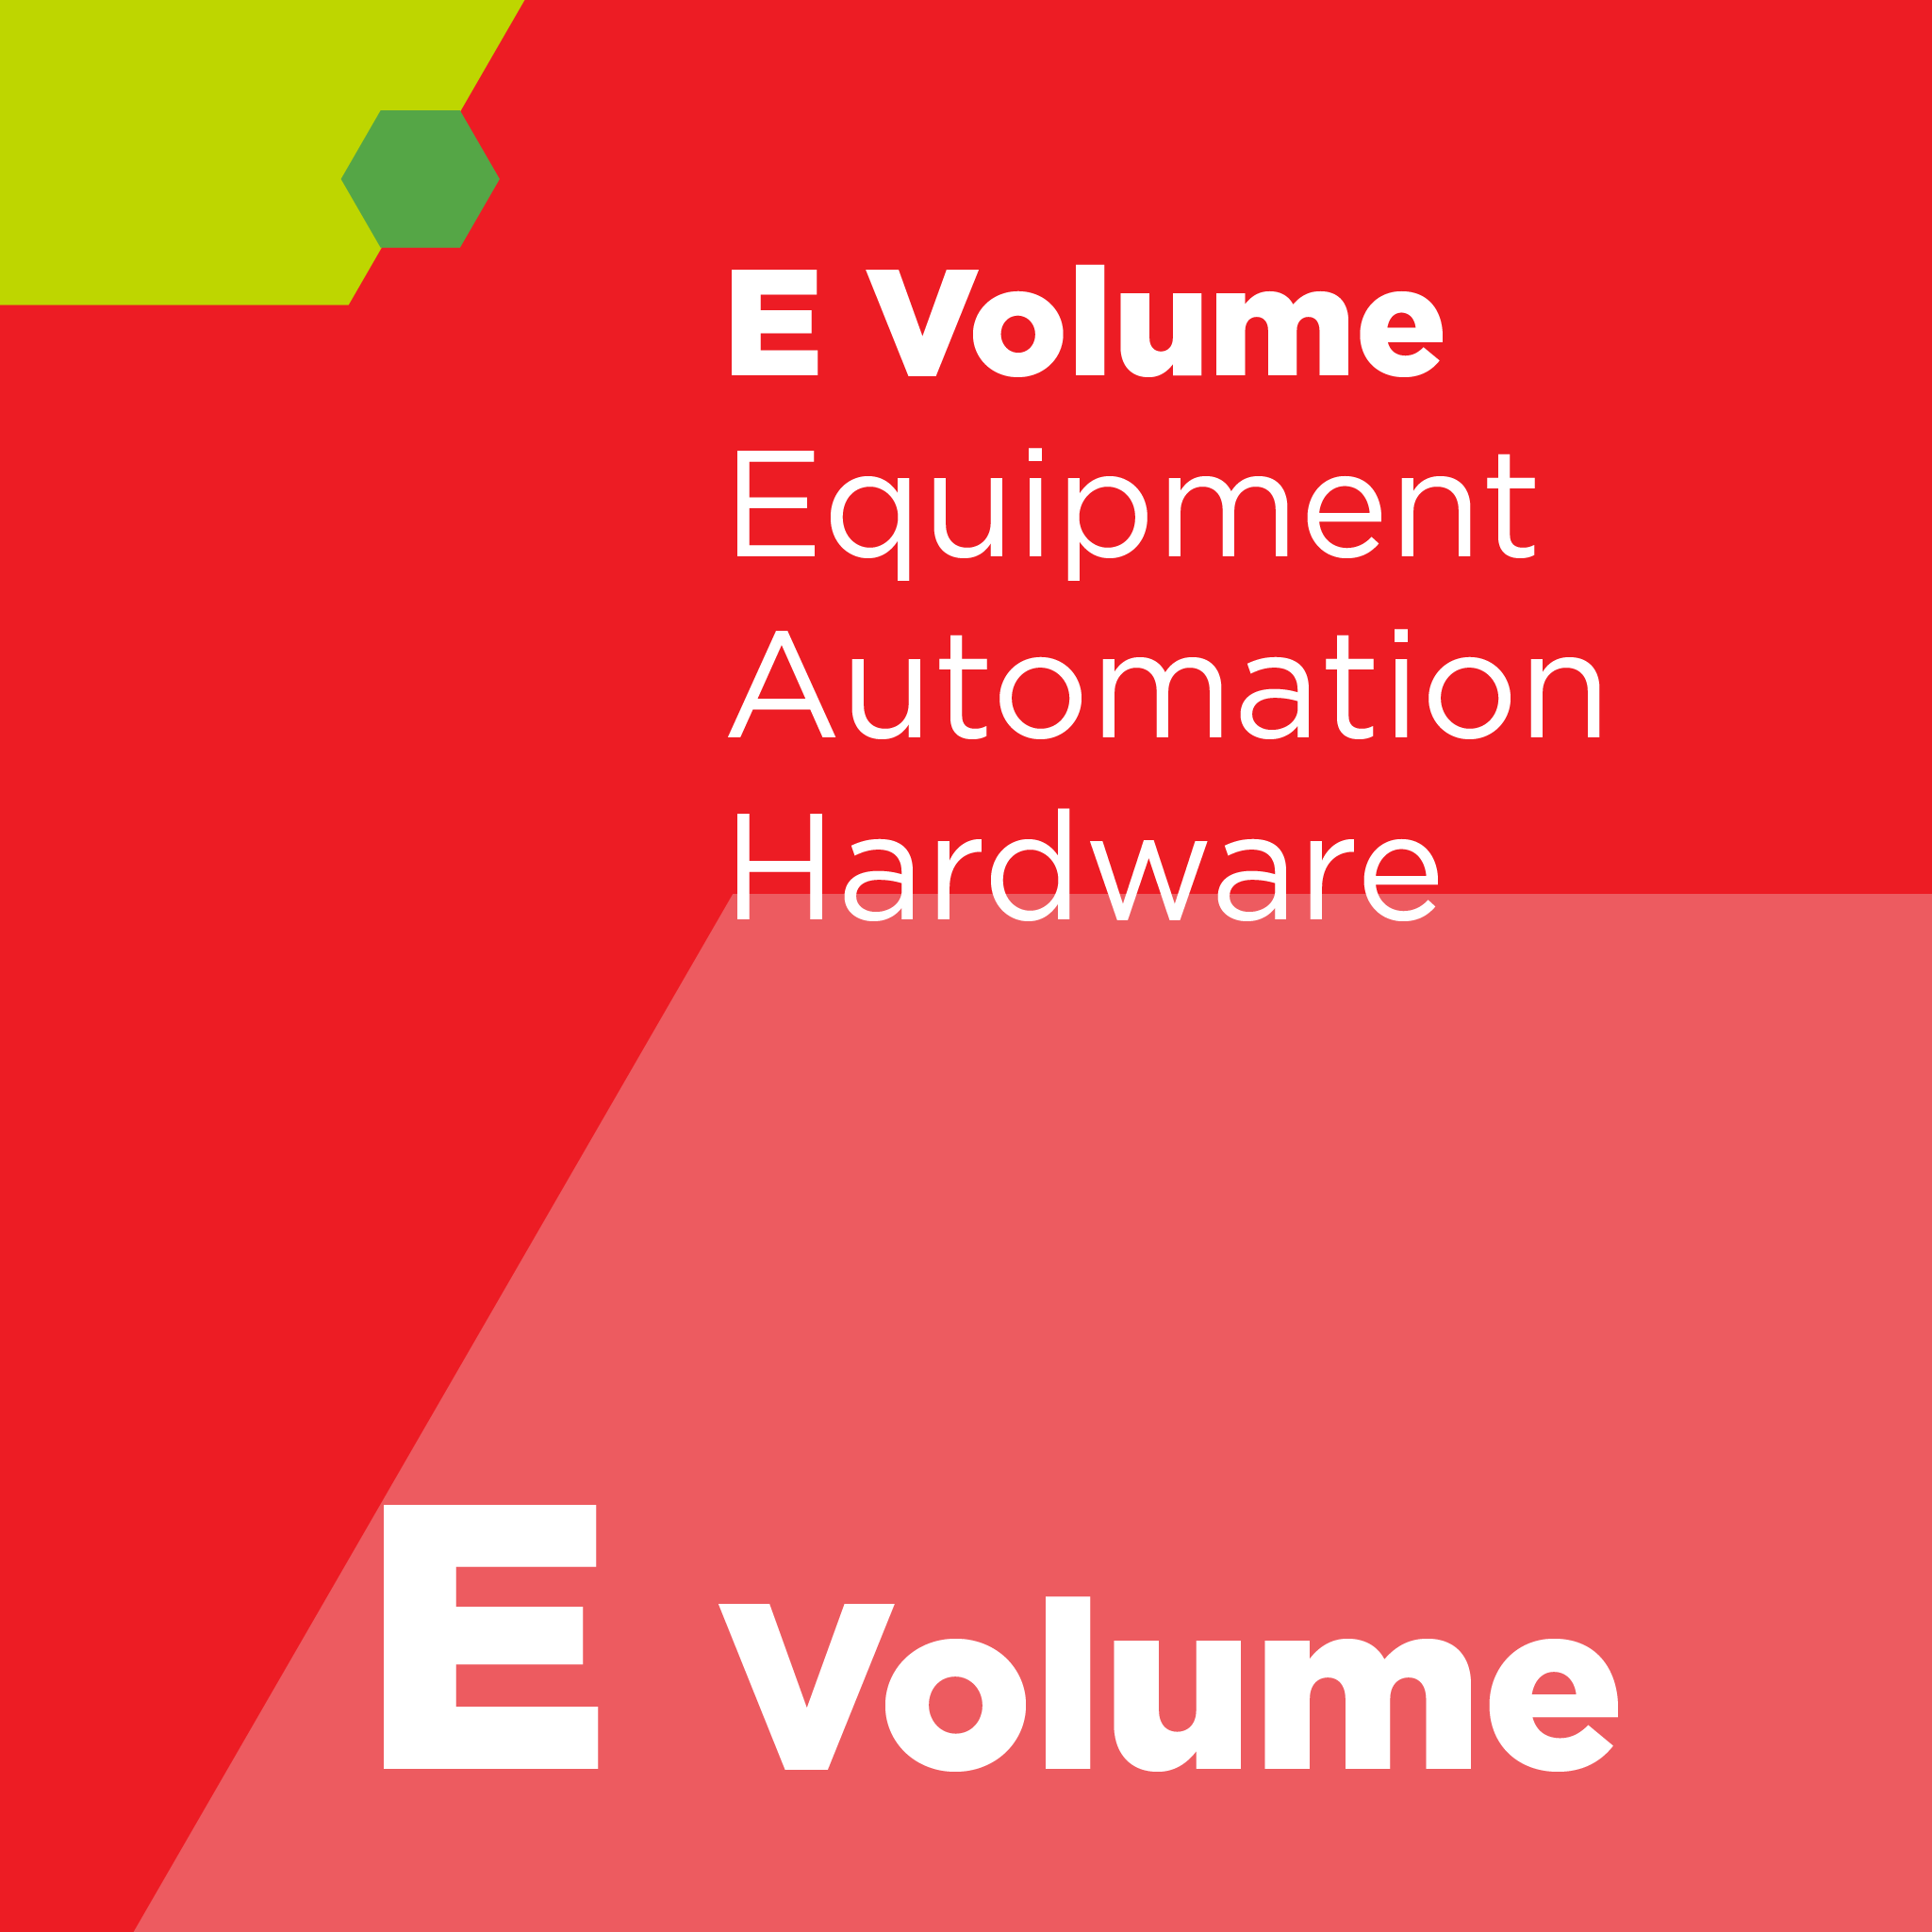 E14900 - SEMI E149 - Guide for Equipment Supplier-Provided Documentation for the Acquisition and Use of Manufacturing Equipment